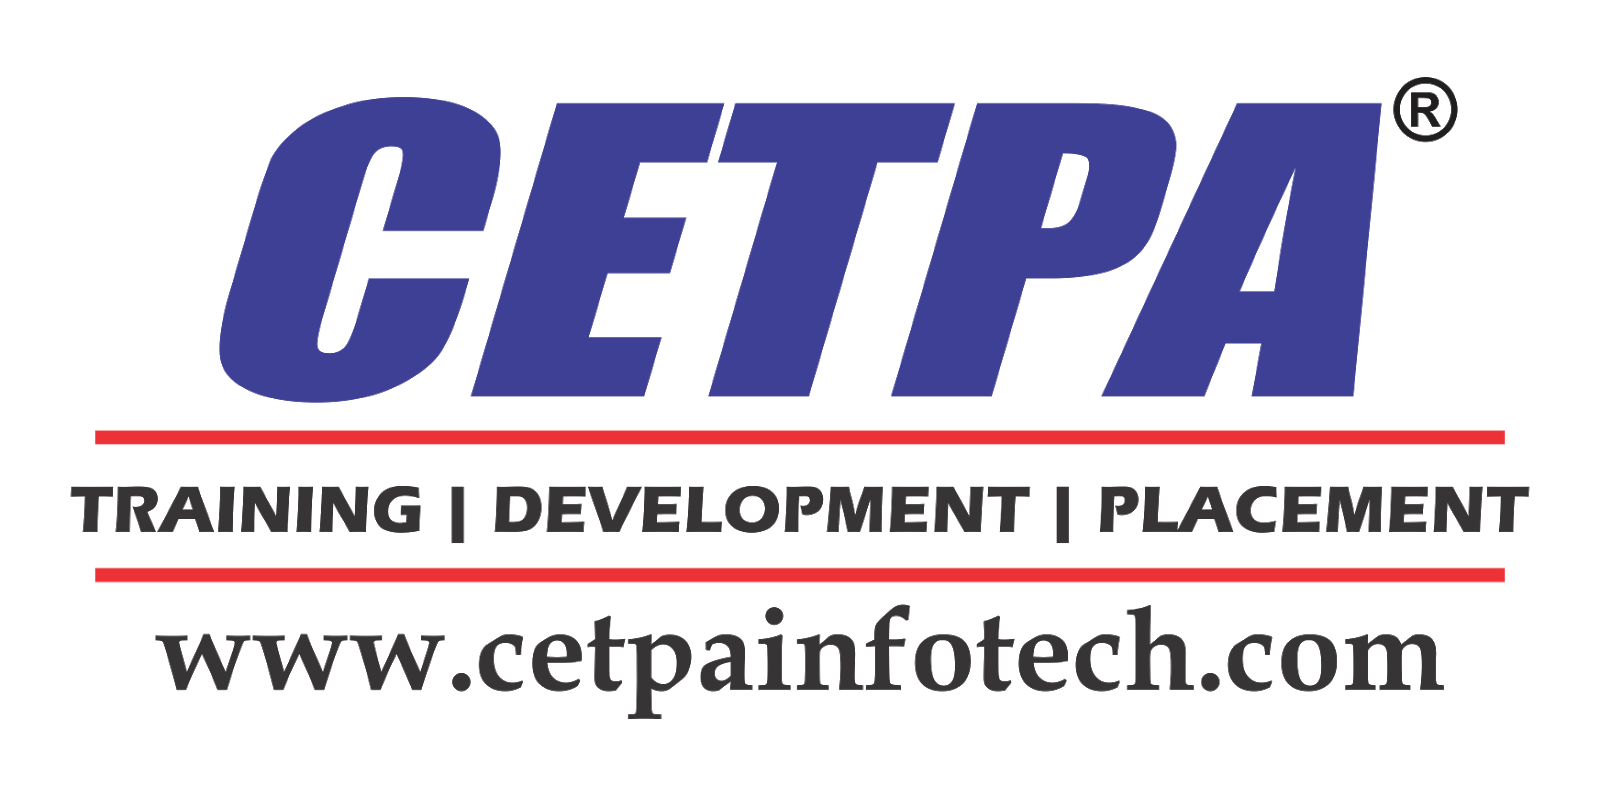 Best IT Software Training & Certification At Cetpa Infotech Training Company 